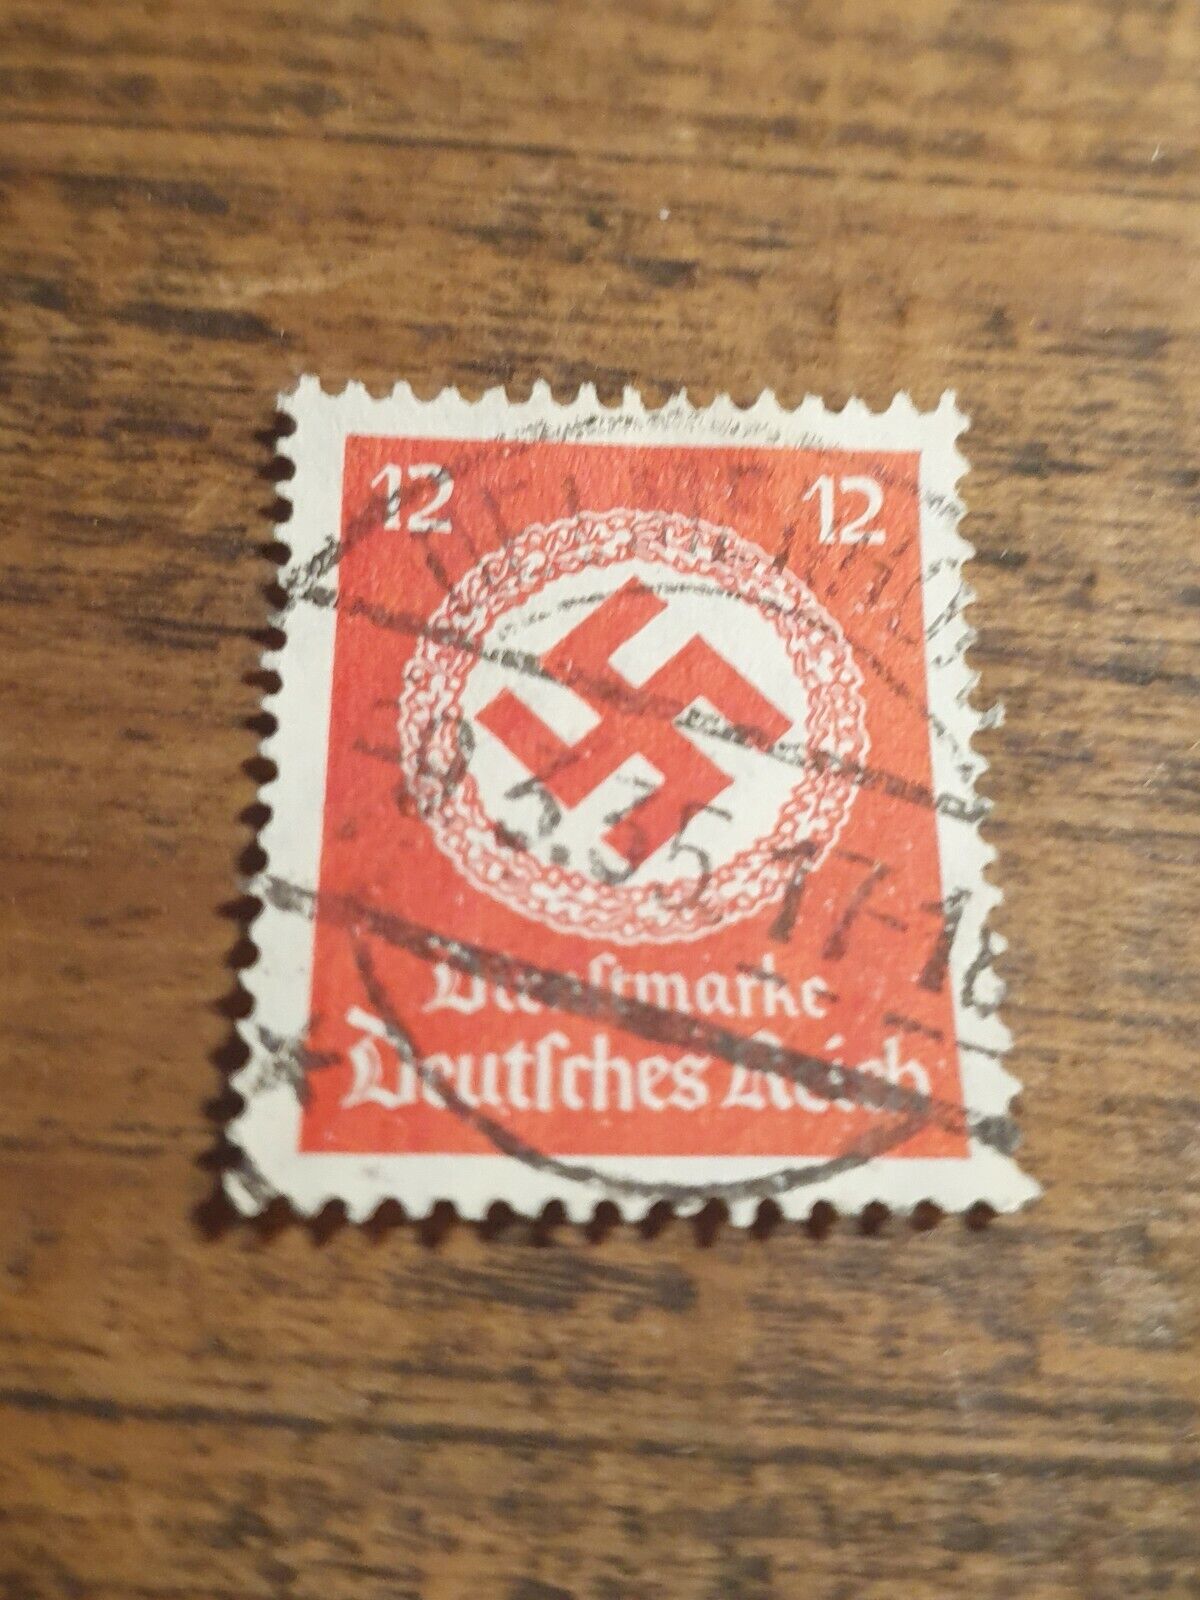 Swastika stamp Christmas one time offfer. 1 dollar. 